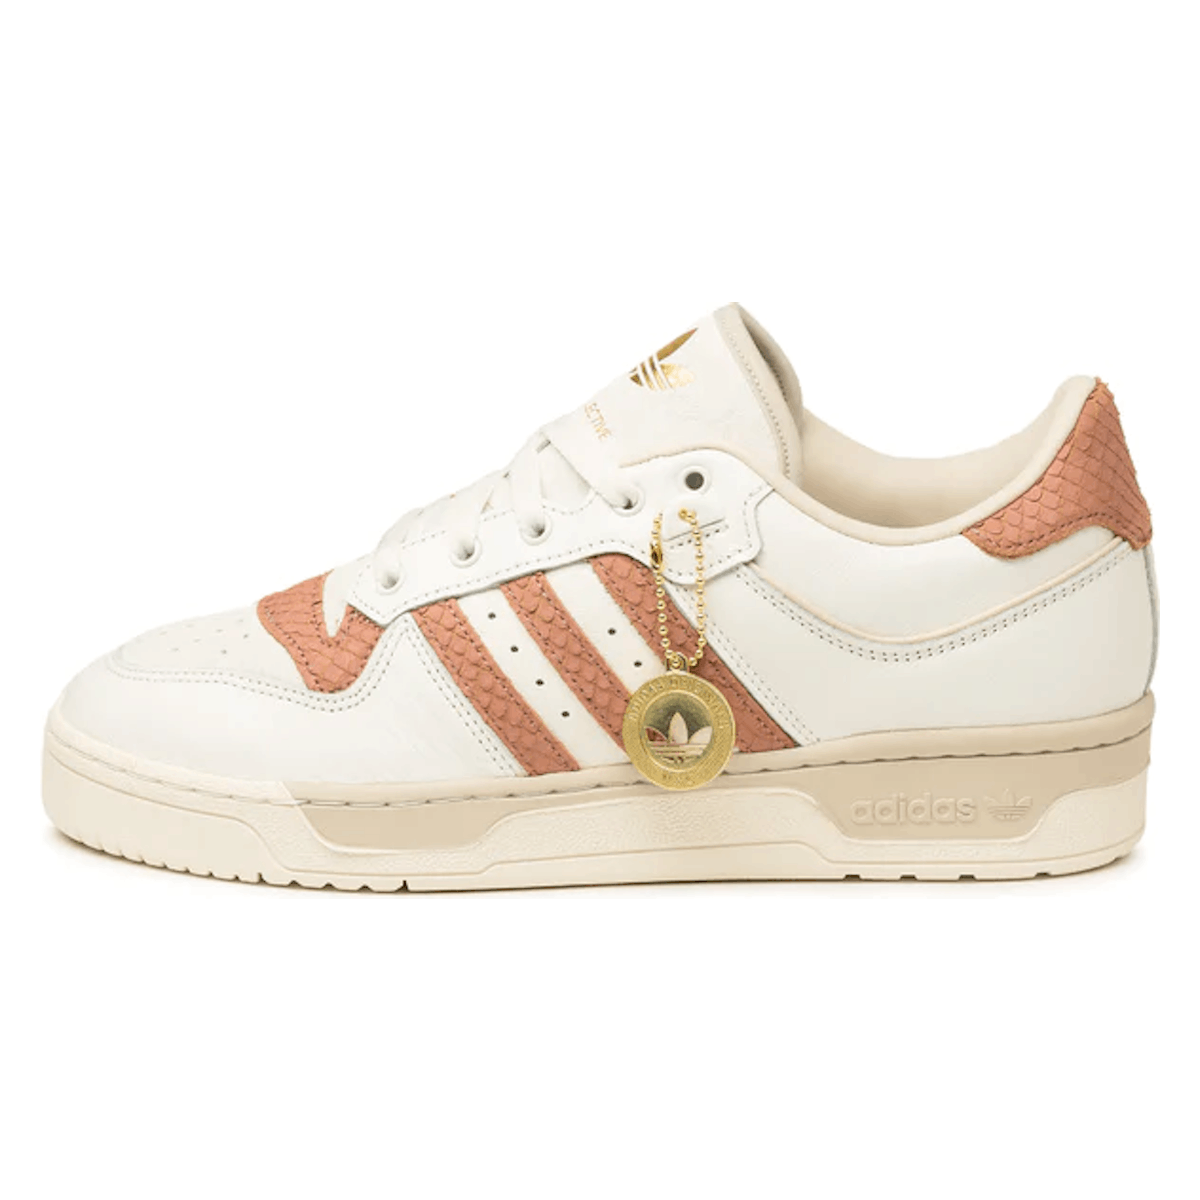 Adidas Rivalry Low 86 "Clay Strata"